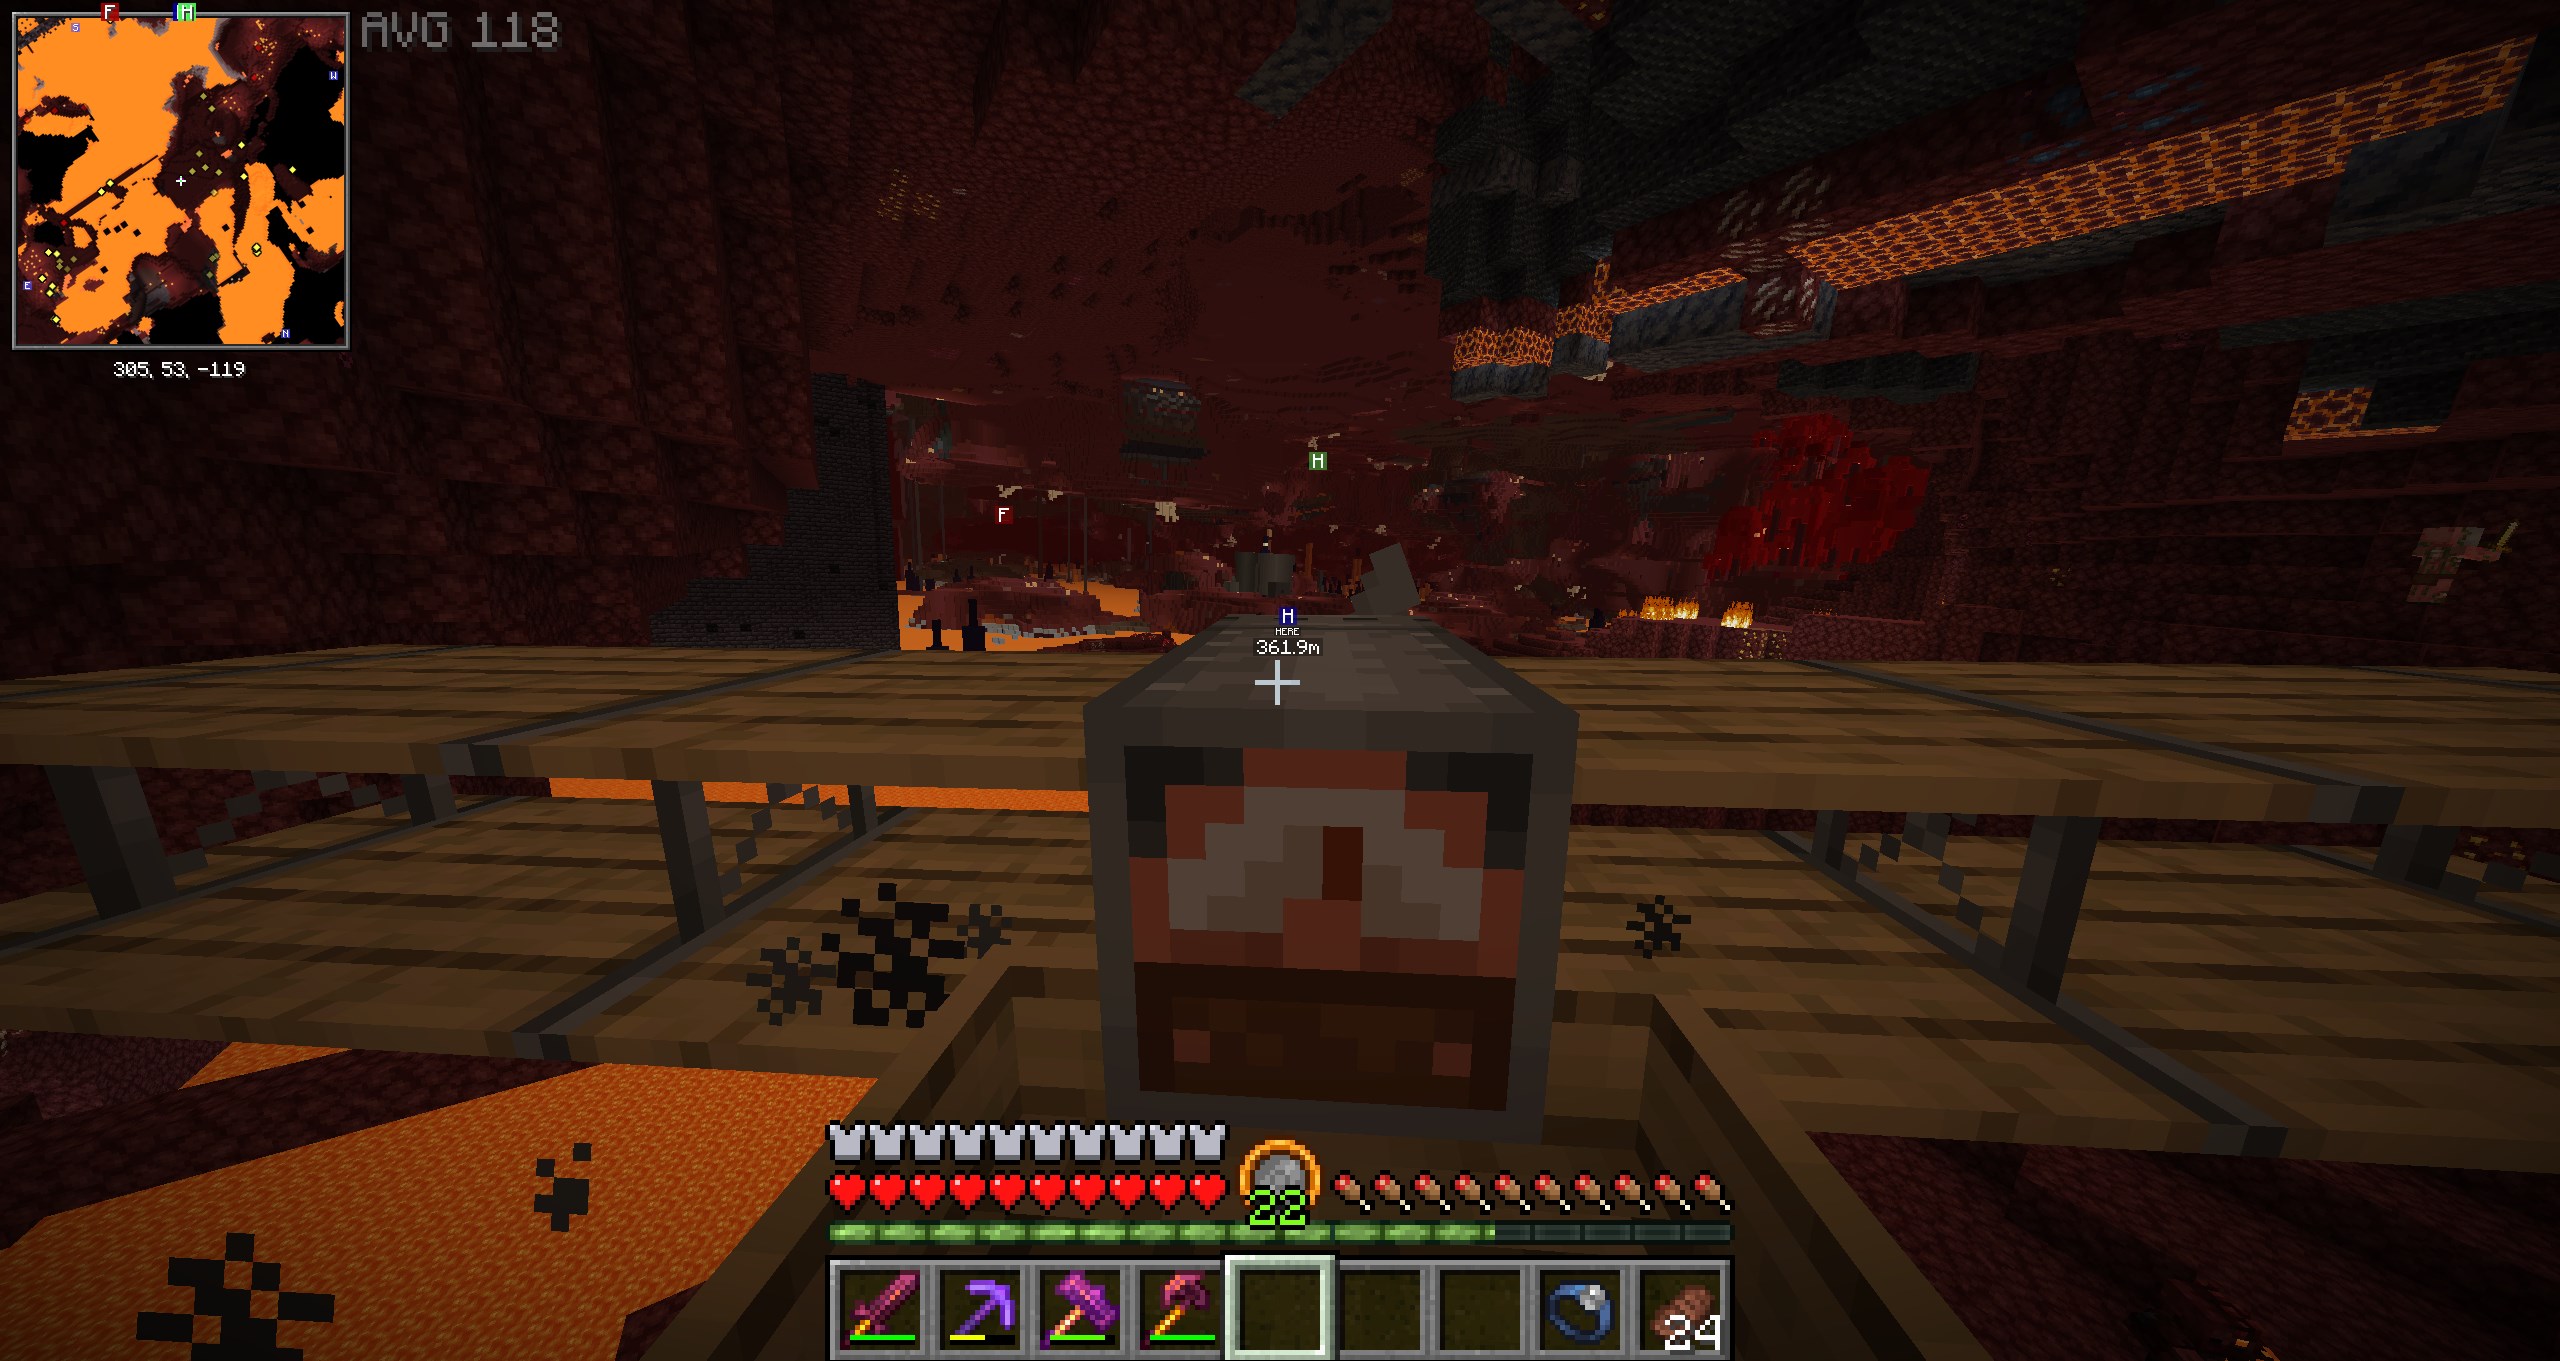 Flying through the nether.